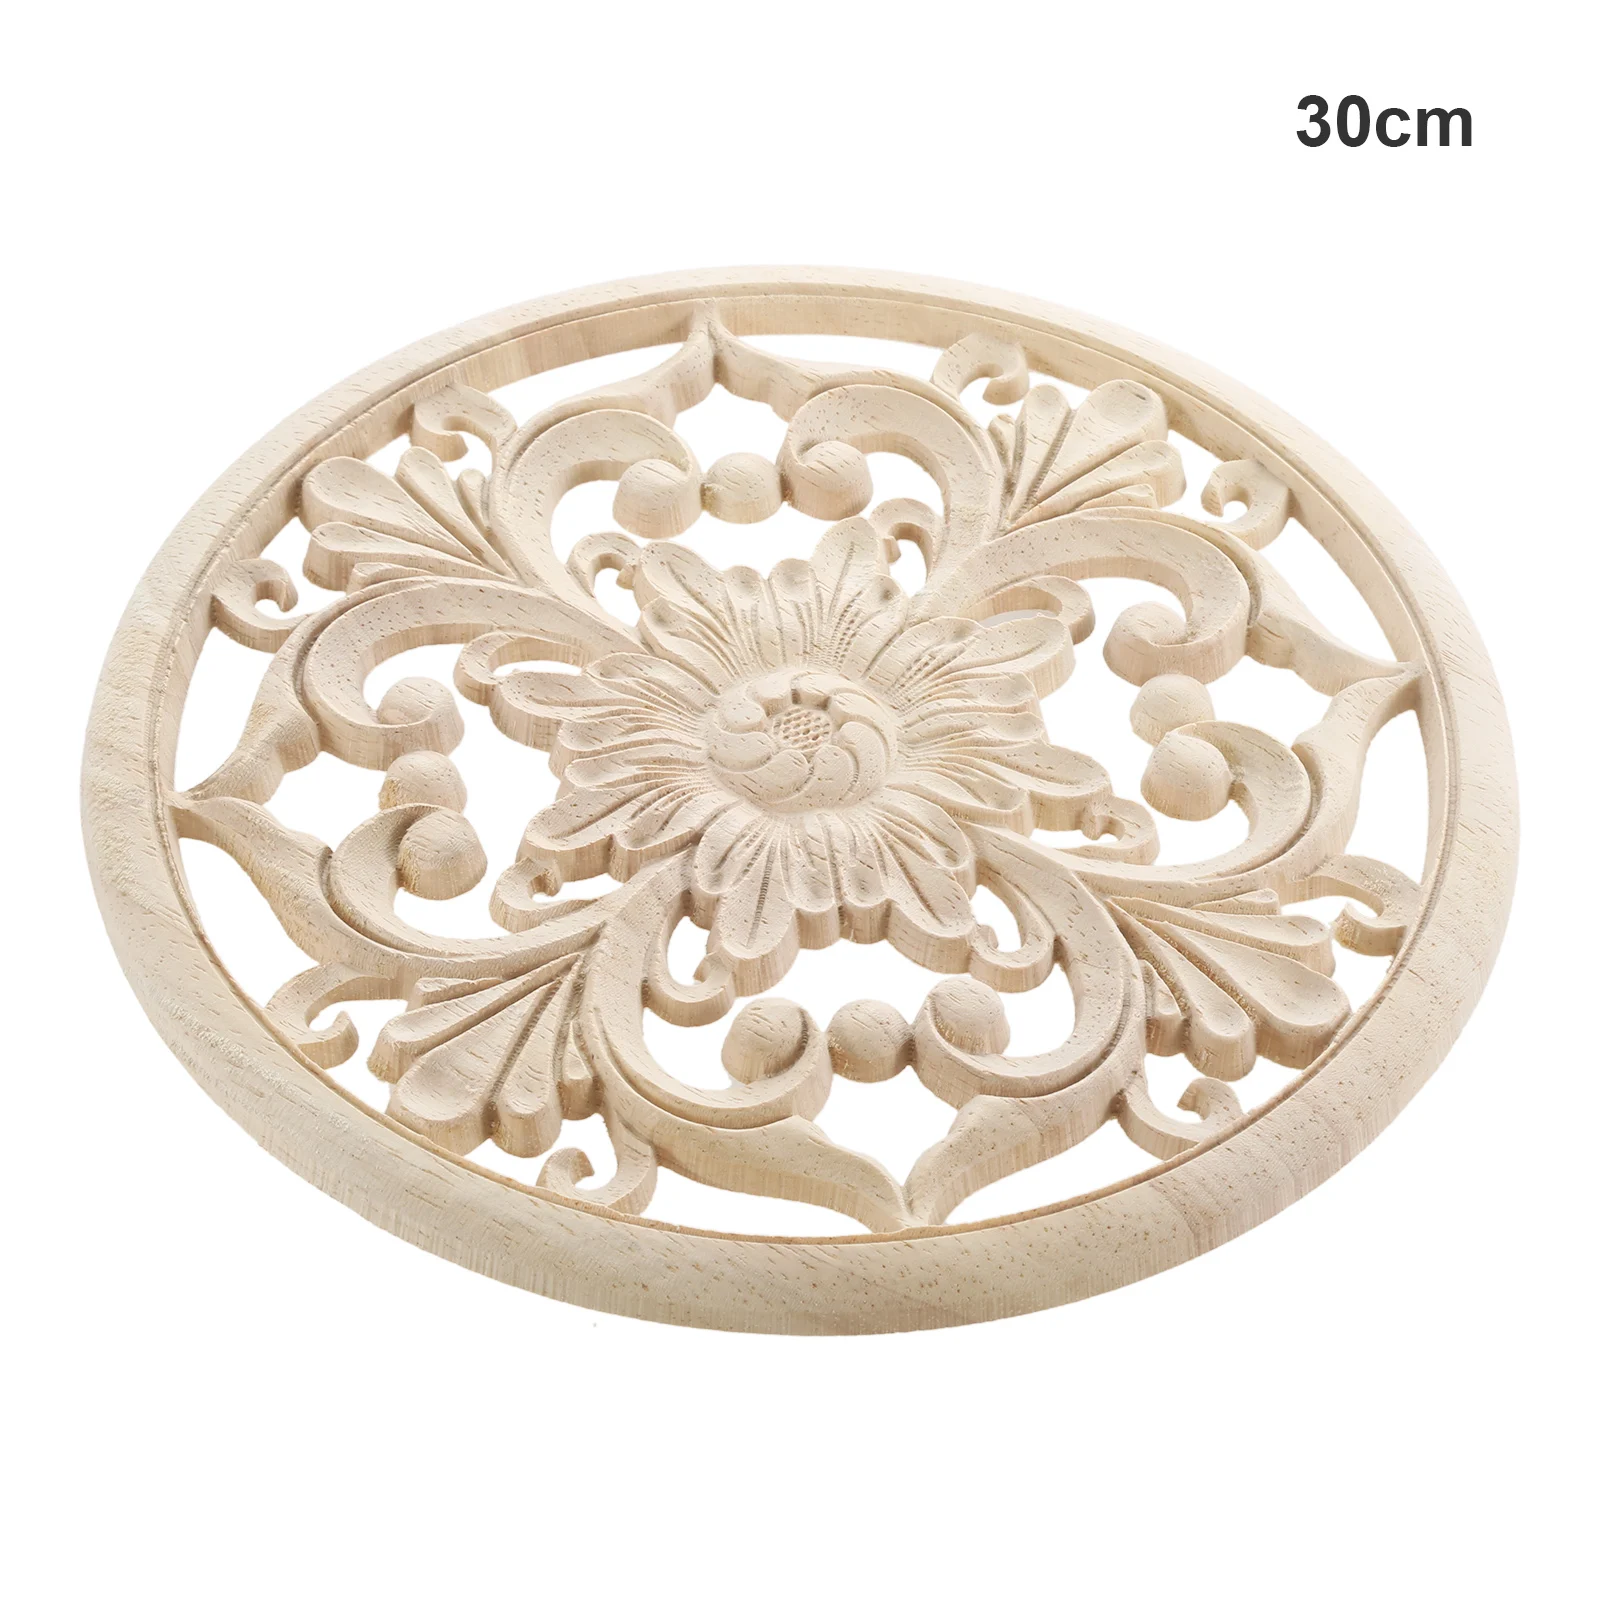 

1 pc vintage décor Round chic floral wood carving decal wall corner sticker frame Wood carved wooden for figurine wall door